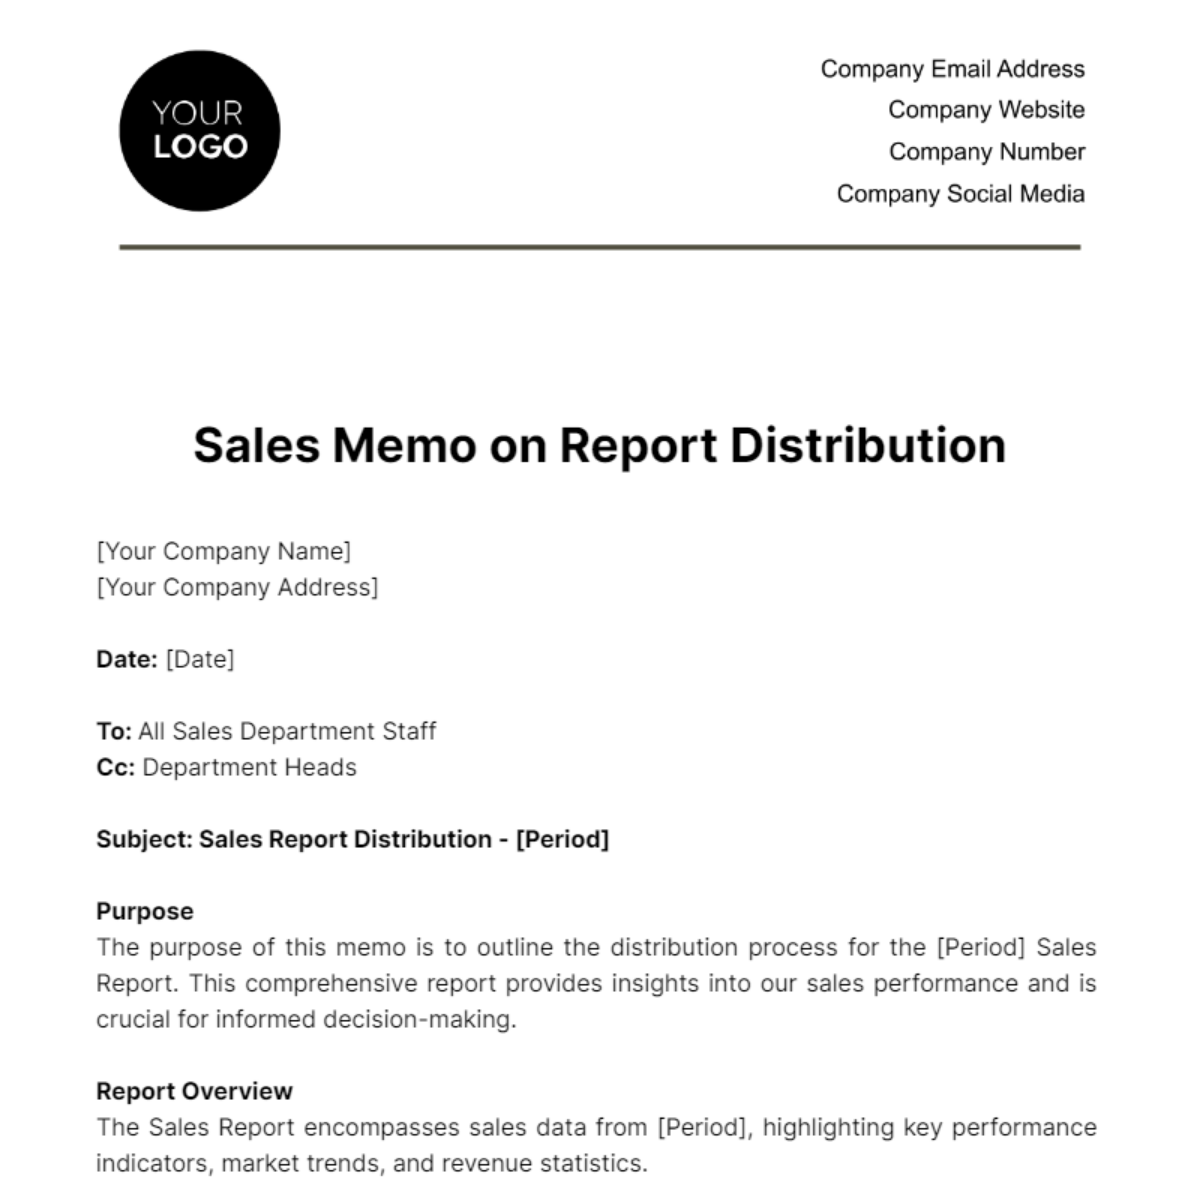 Free Sales Memo on Report Distribution Template